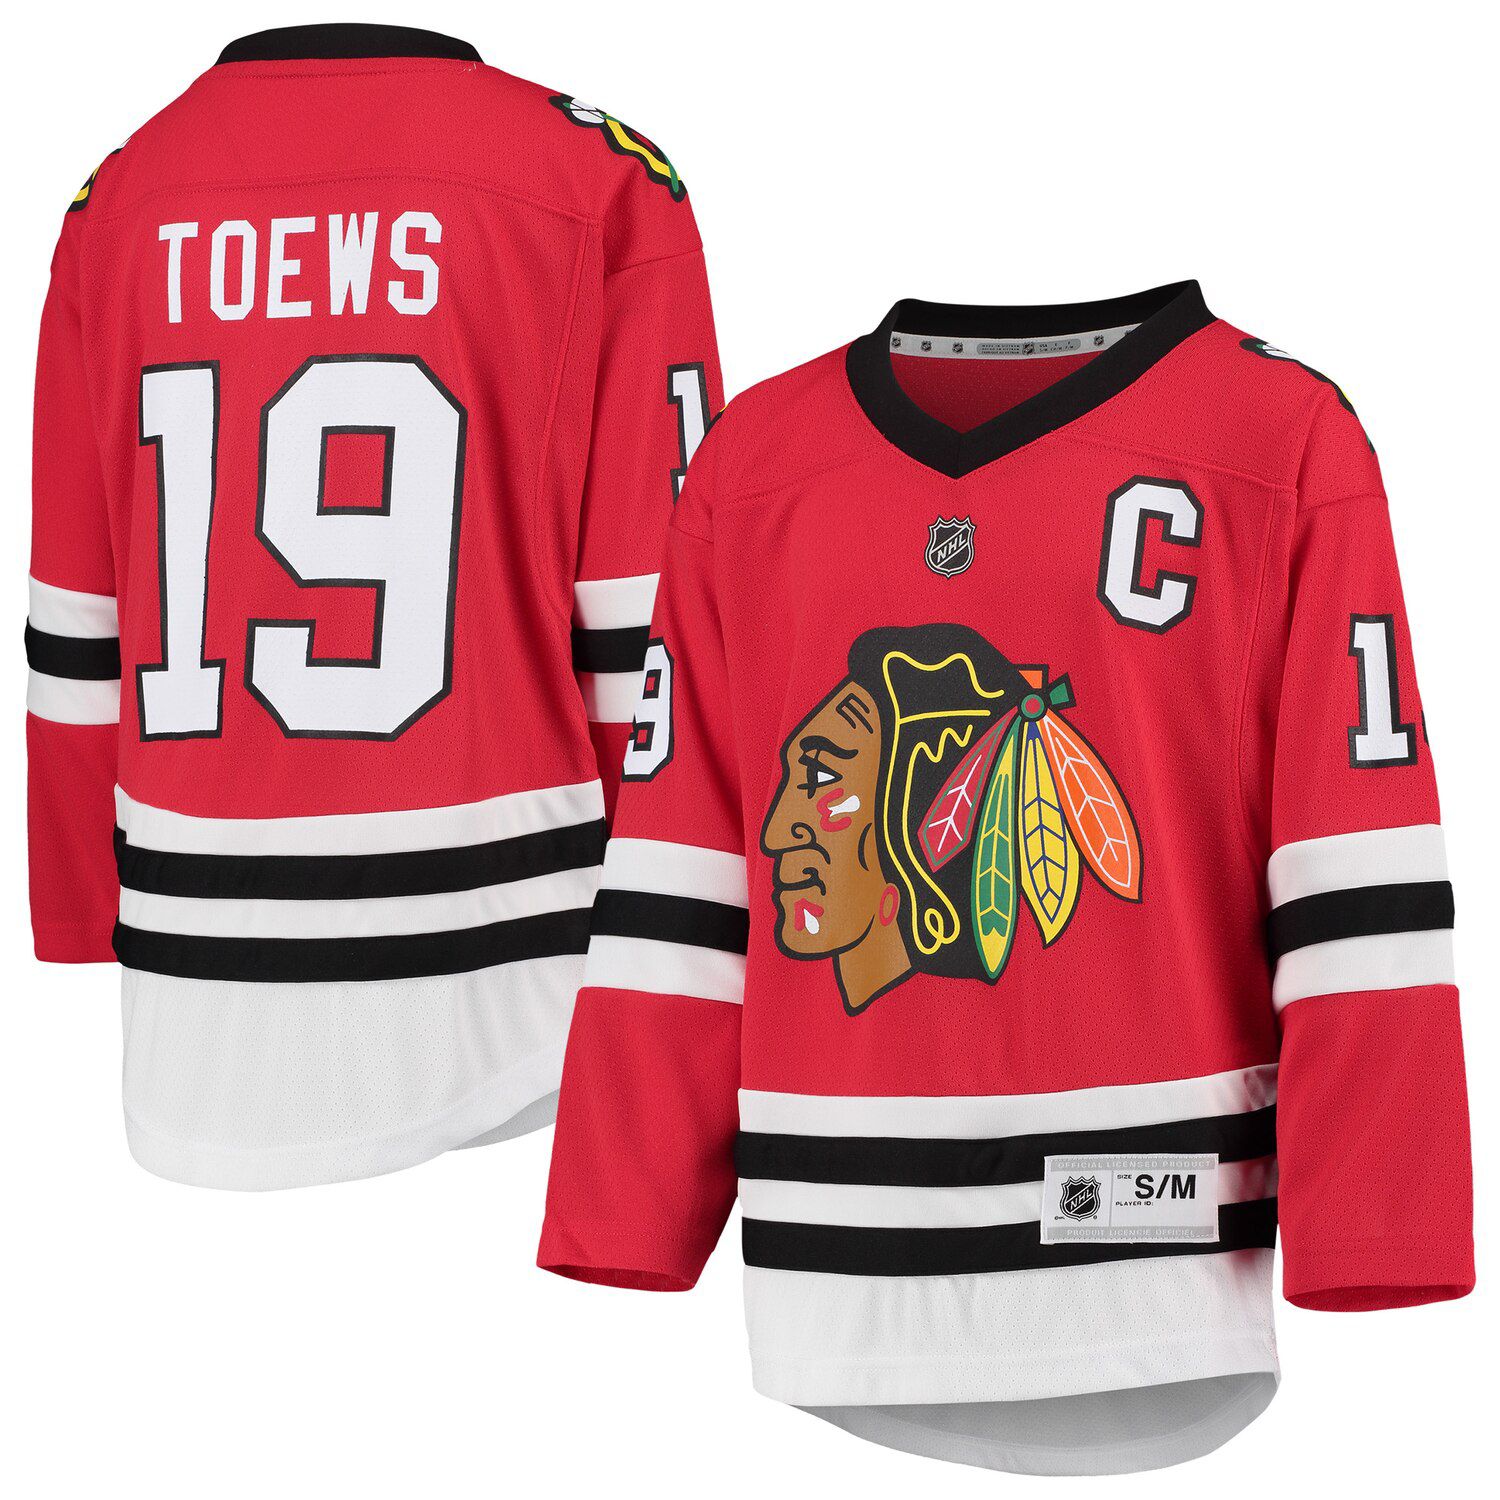 toews jersey red